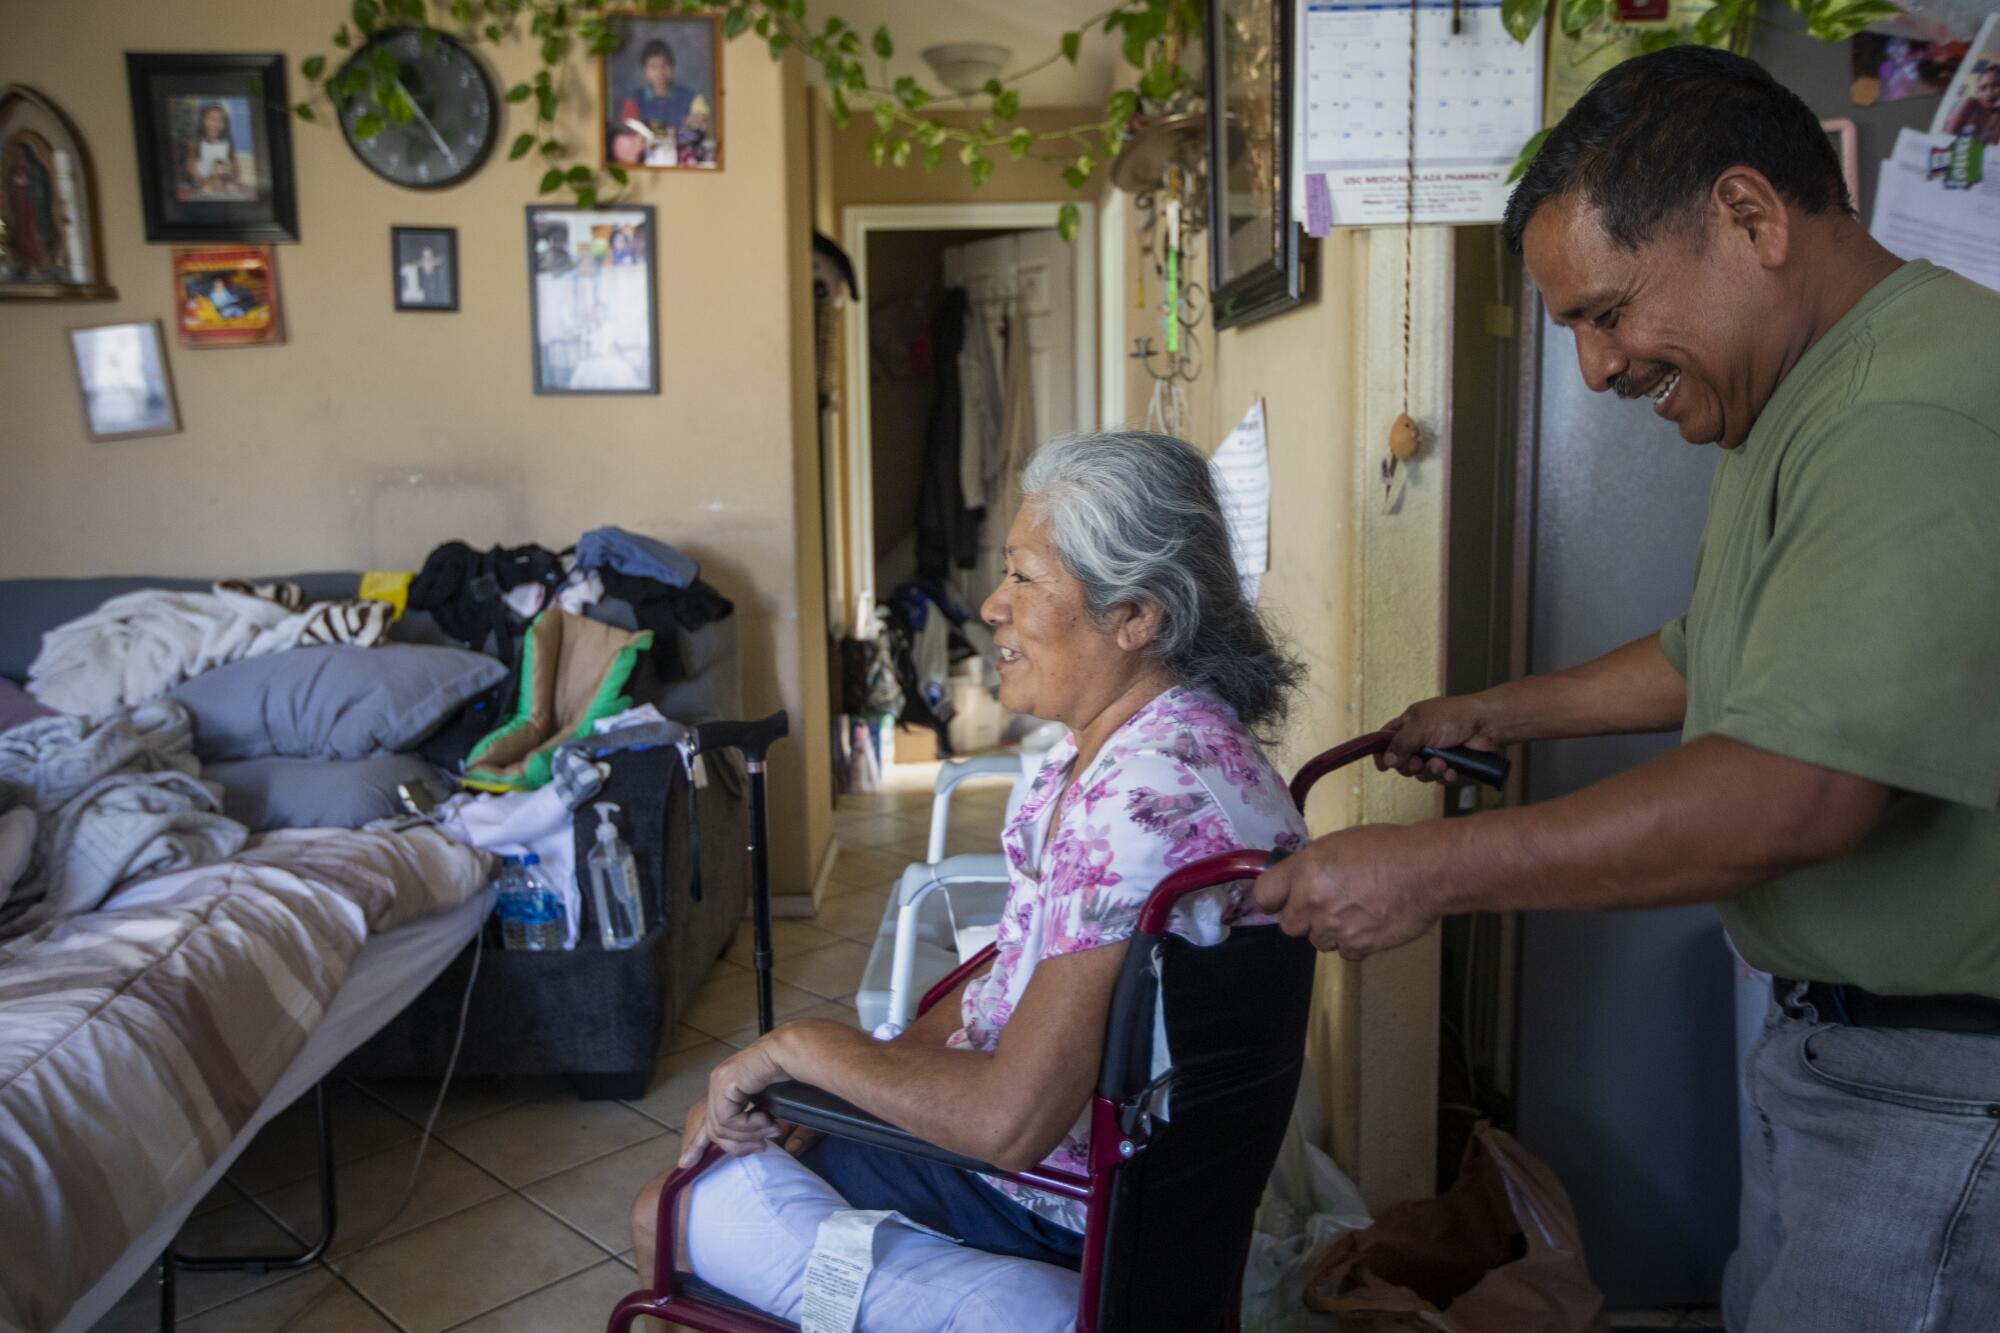 Jose Morales helps his wife, Reyna Chautla, to the dinner table at their home.